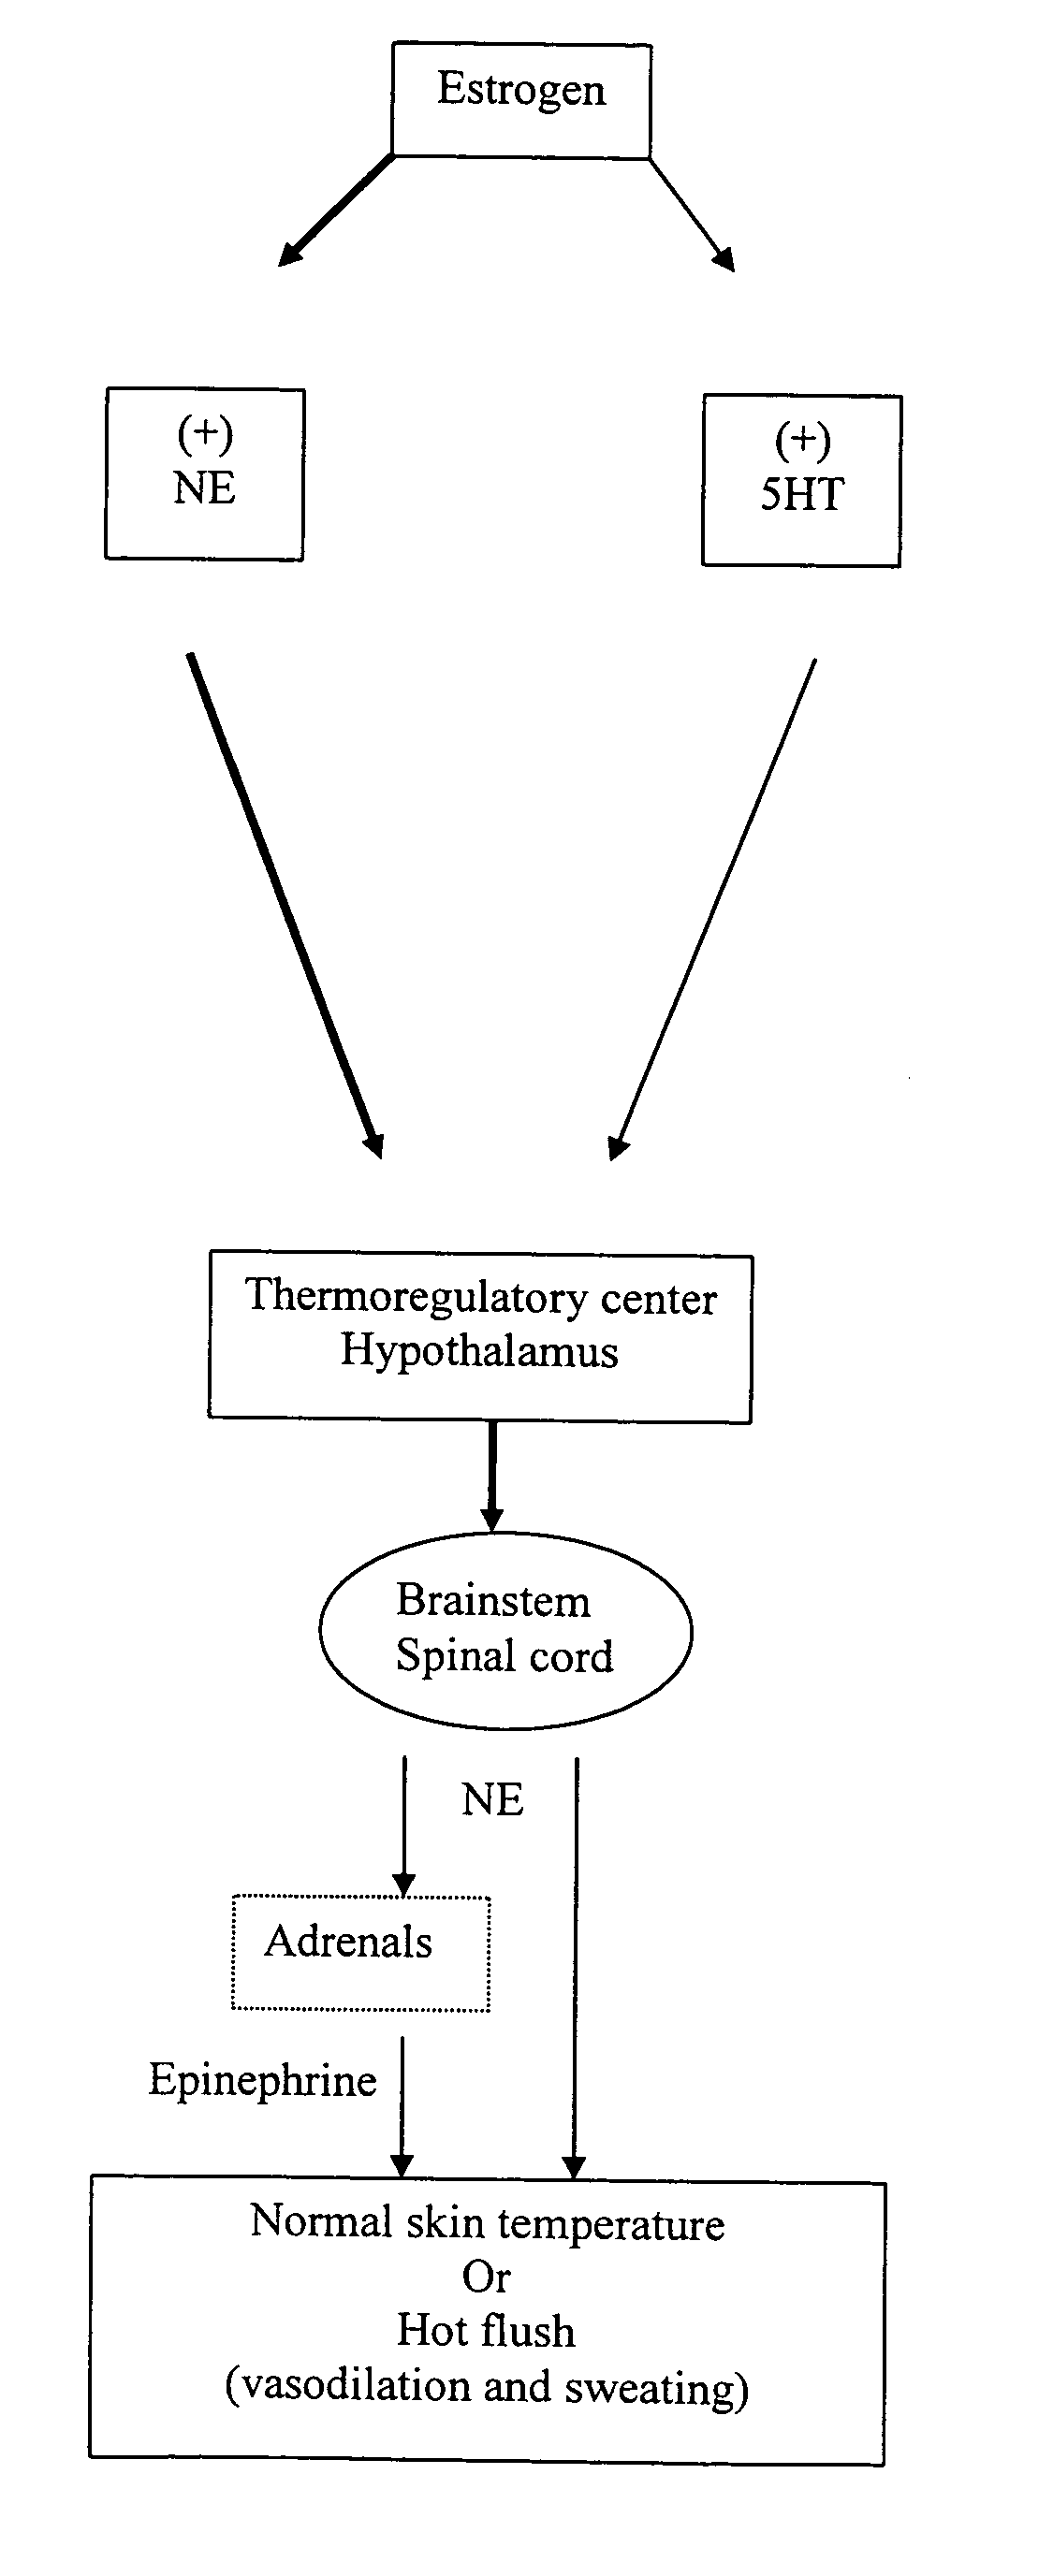 Phenylaminopropanol derivatives and methods of their use